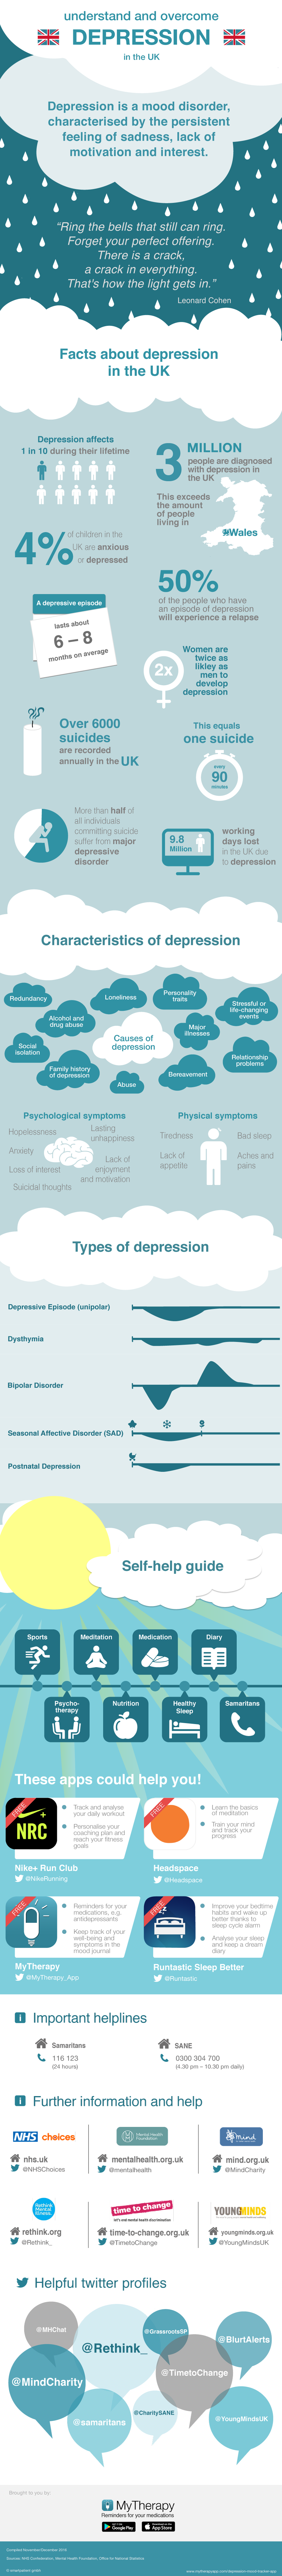 infographic with facts and figures about depression in the UK